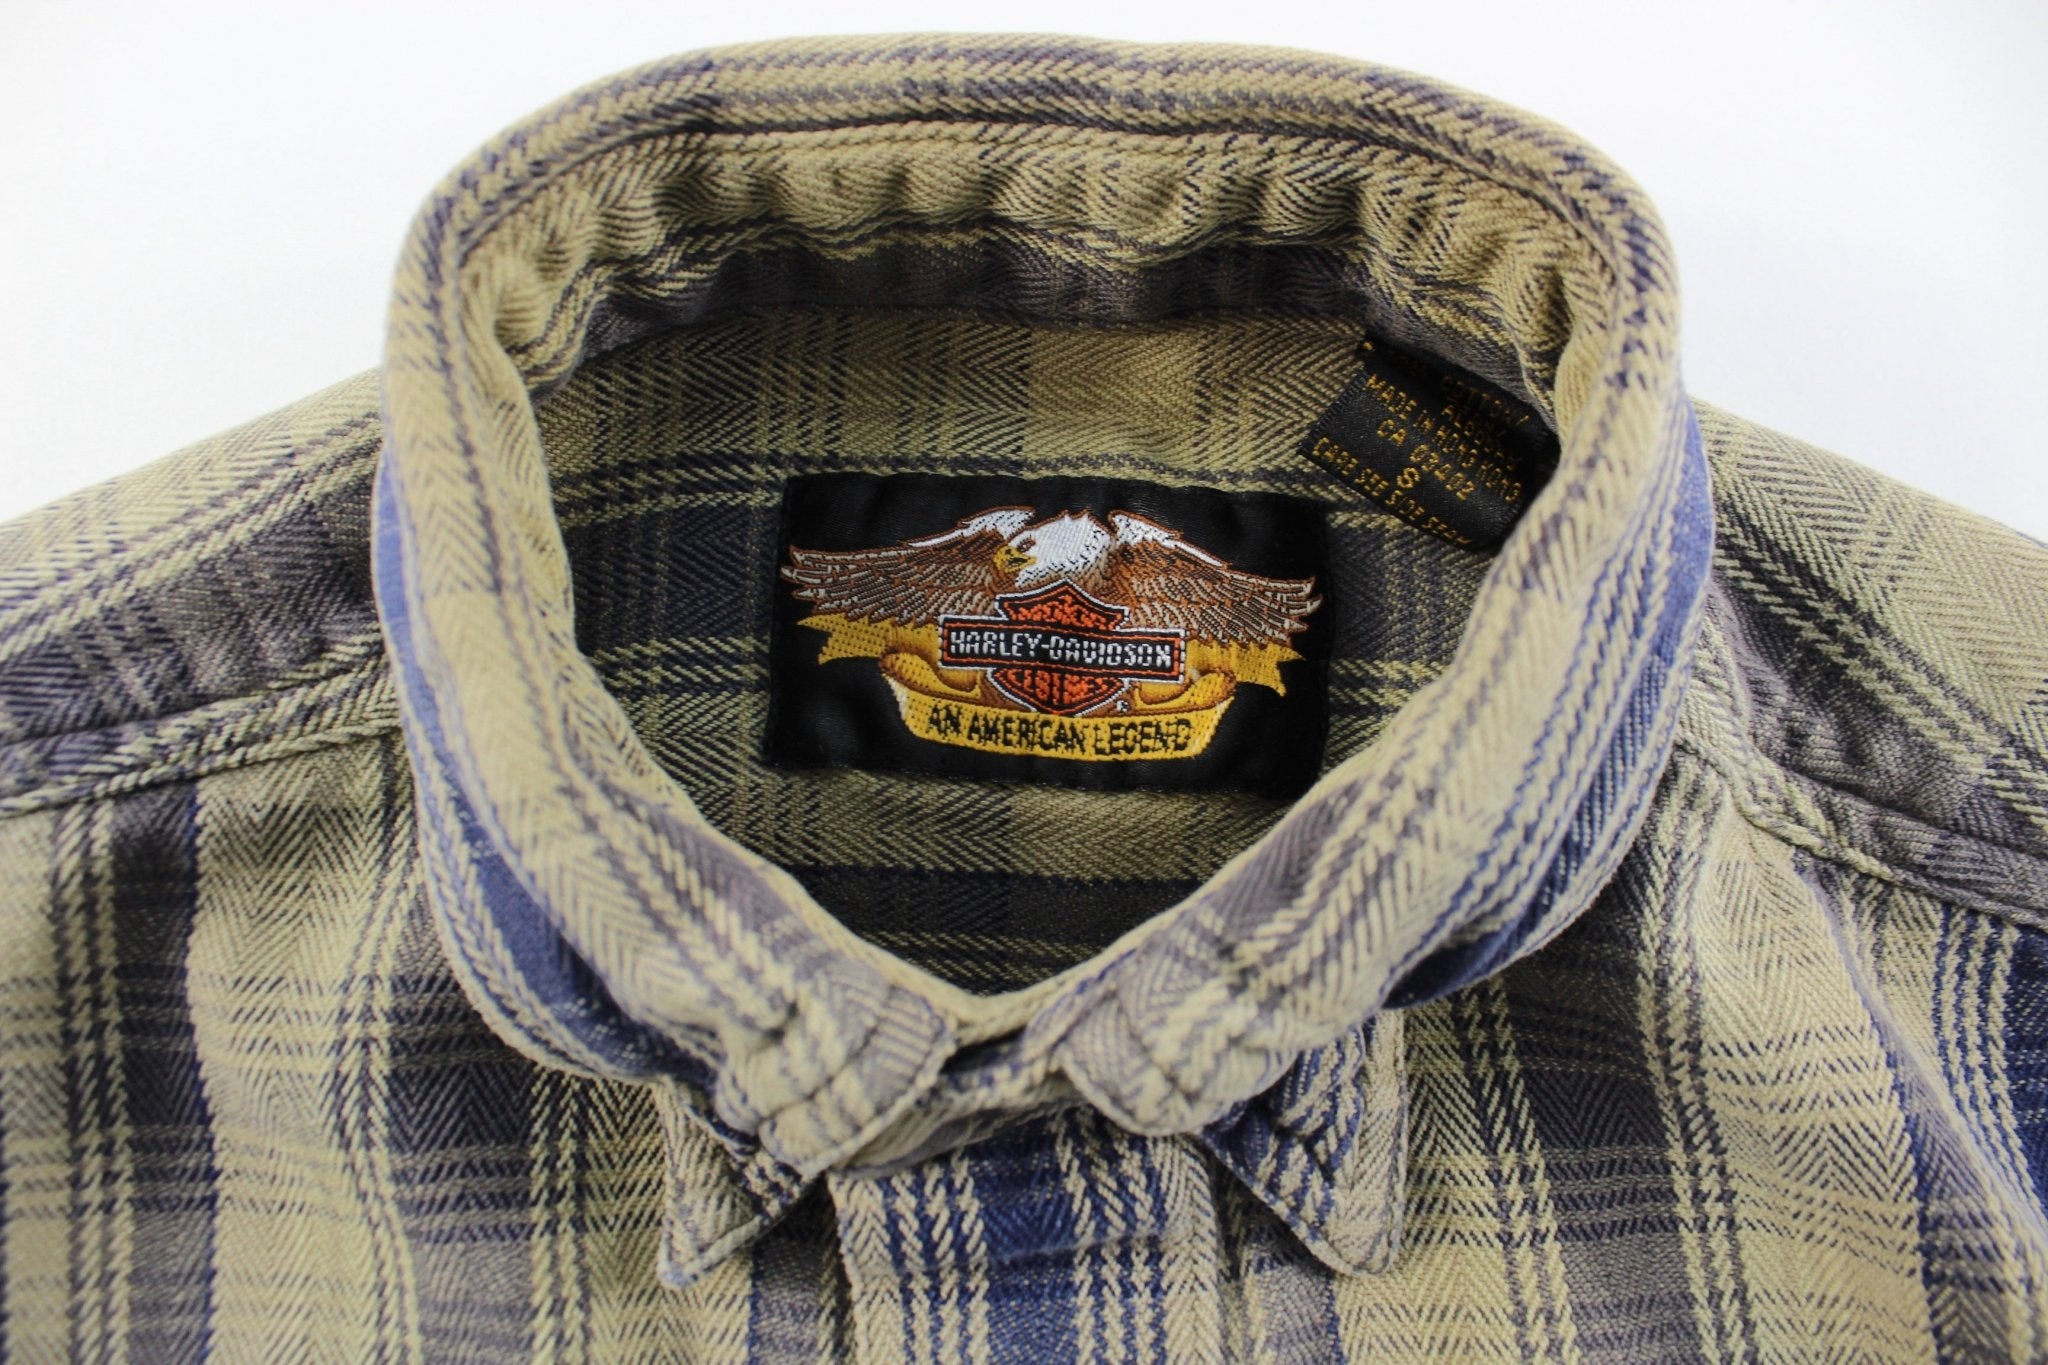 Harley Davidson Motorcycles Blue & Green Plaid Button Down